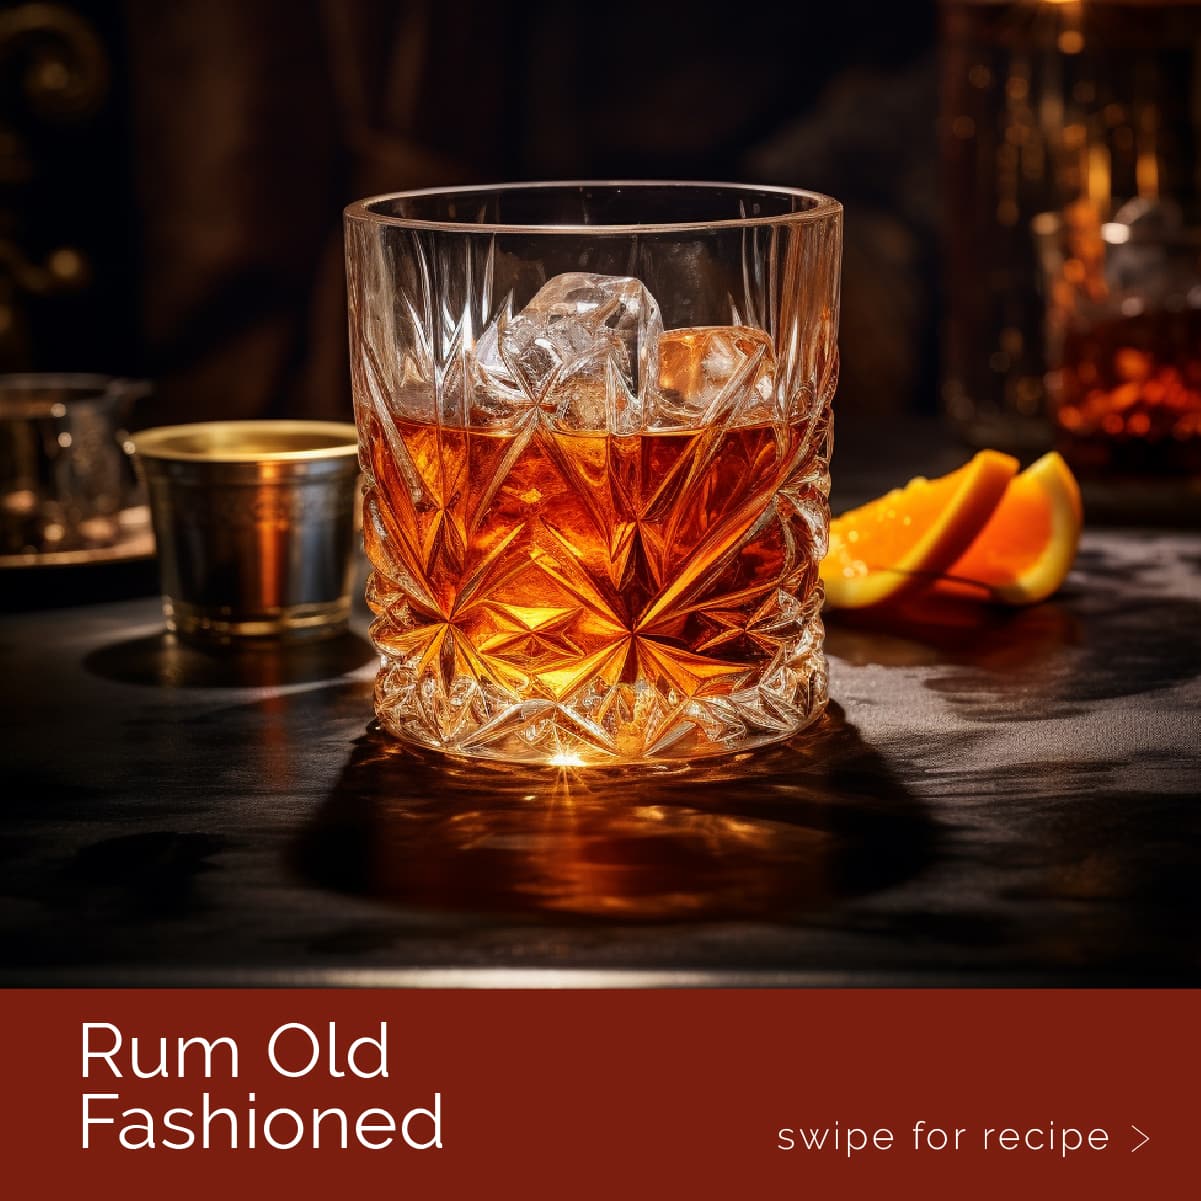 A Rum Old Fashioned cocktail